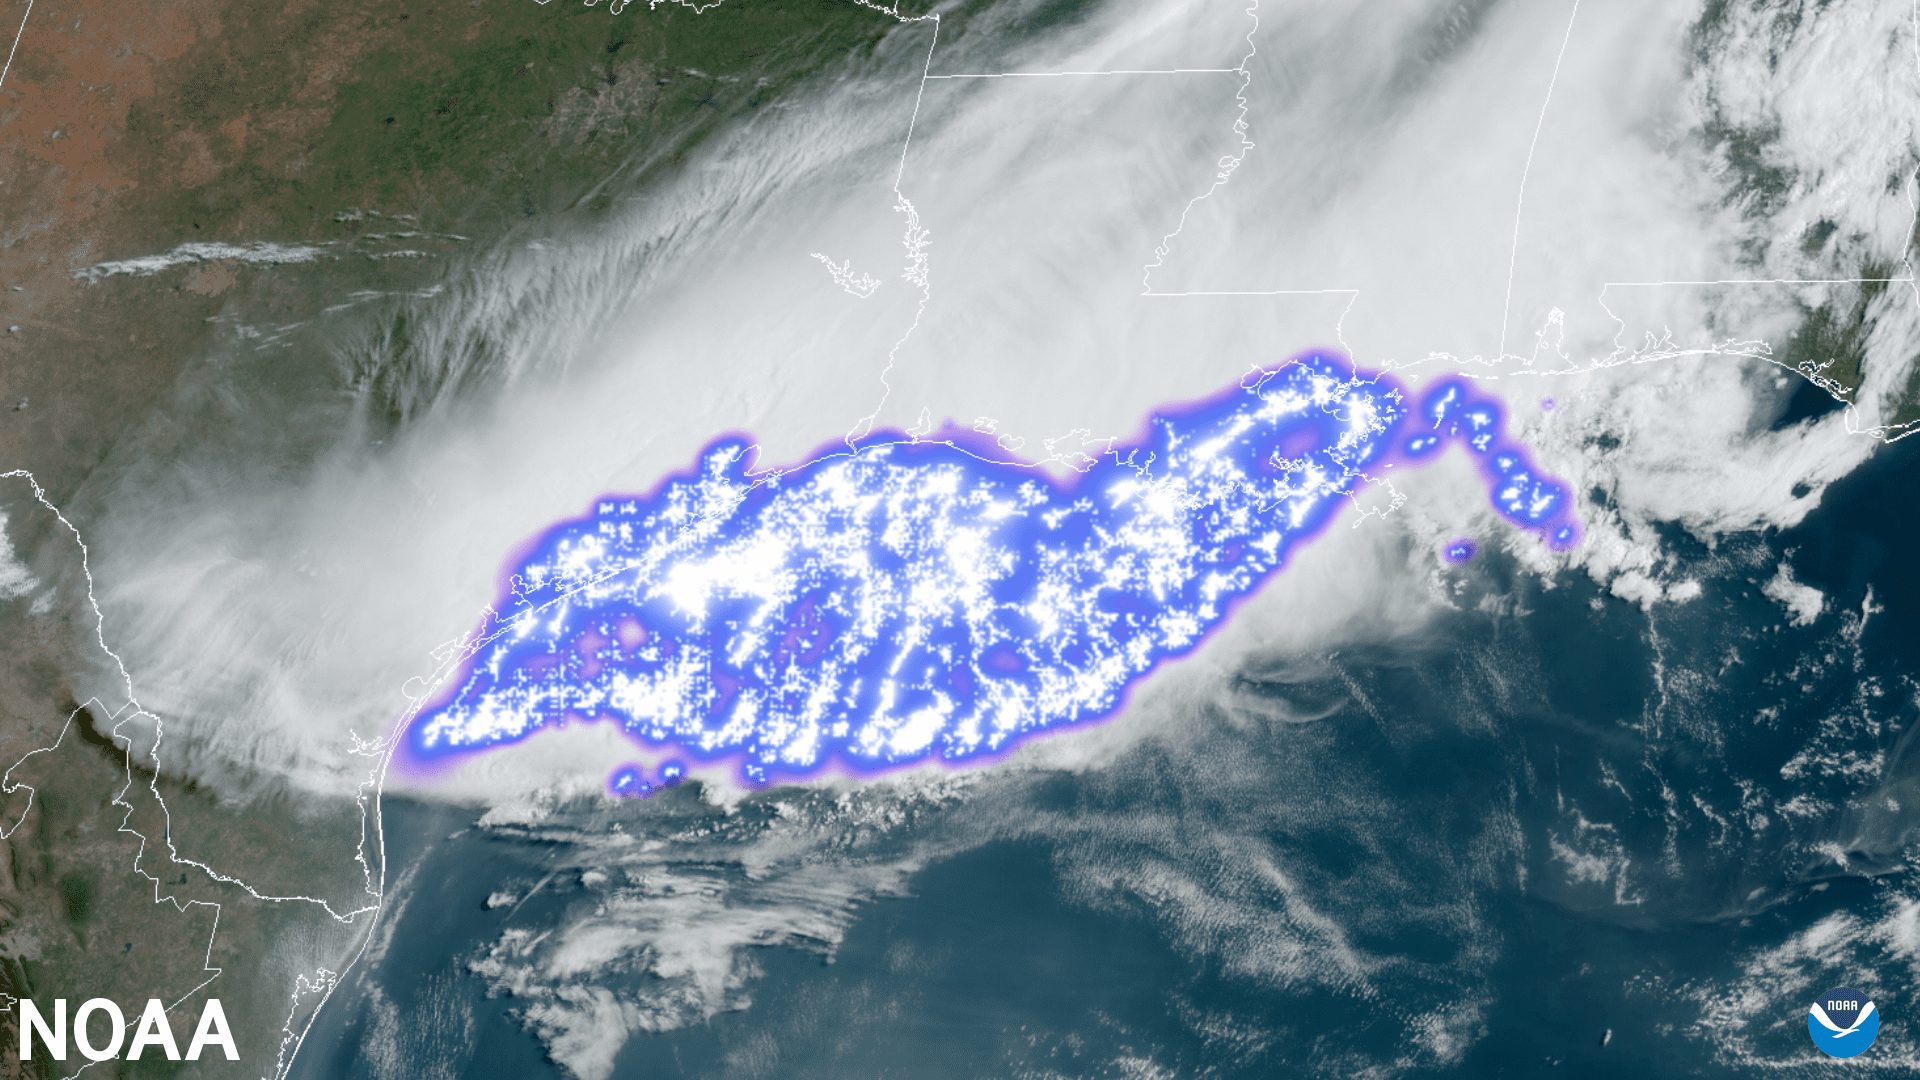 PHOTO-Lightning as seen from the Geostationary Lightning Mapper on NOAA's GOES-16 satellite - 042920 - NOAA